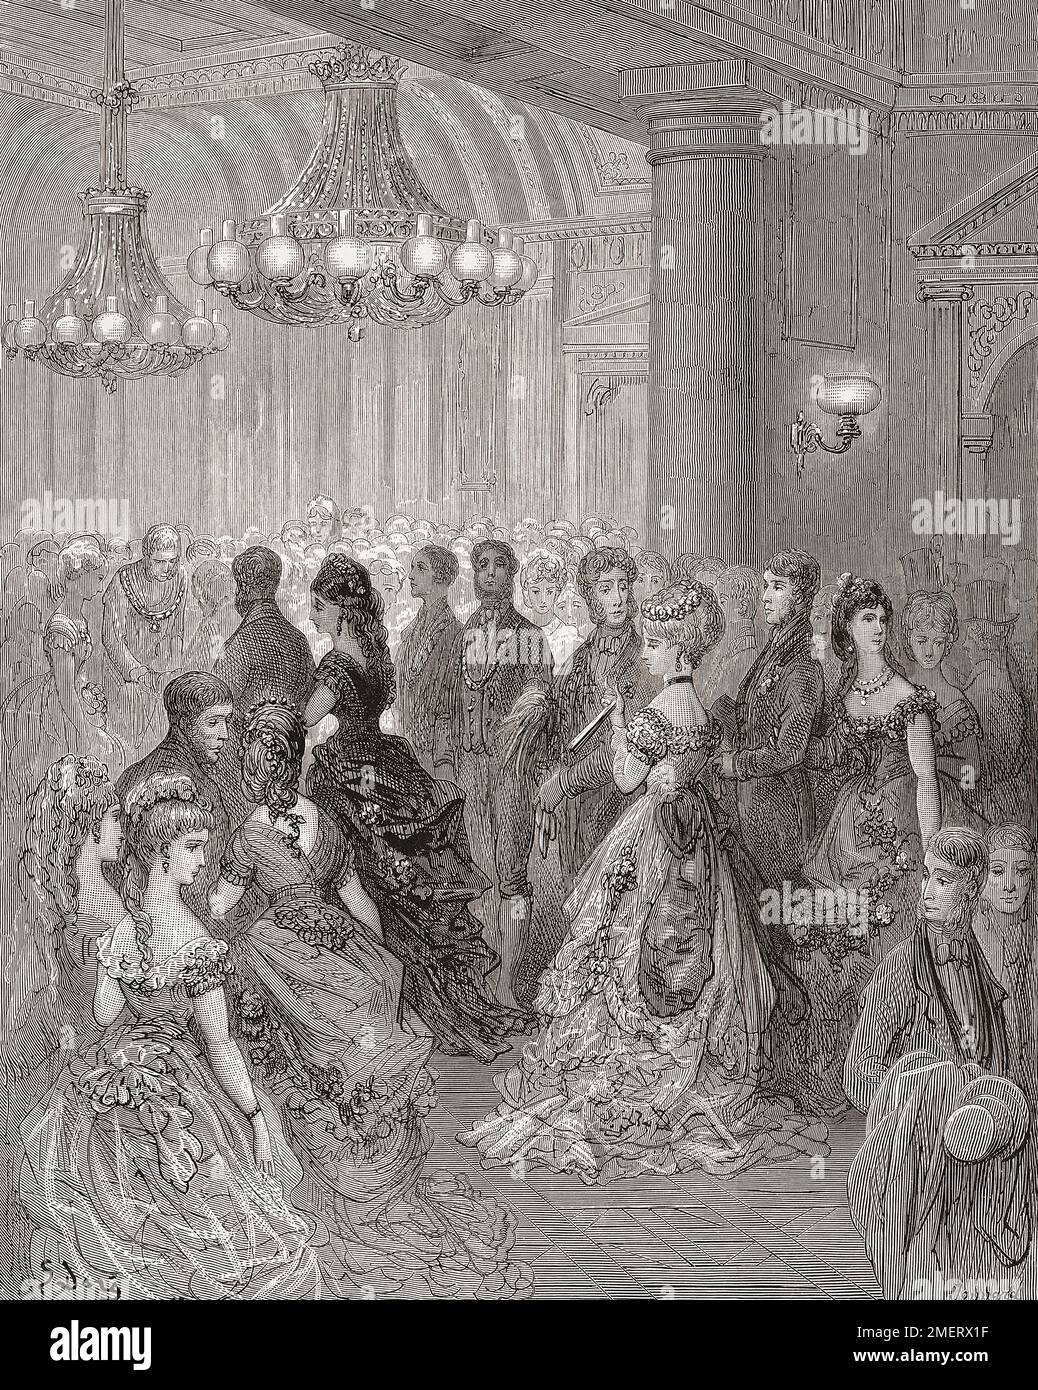 A ball at Mansion House London, 19th century.  Mansion House is the official residence of Lord Mayor of London.  In the picture the Lord Mayor is seen greeting guests.  After an illustration by Gustave Doré in the 1890 American edition of London: A Pilgrimage written by Blanchard Jerrold and illustrated by Gustave Doré. Stock Photo